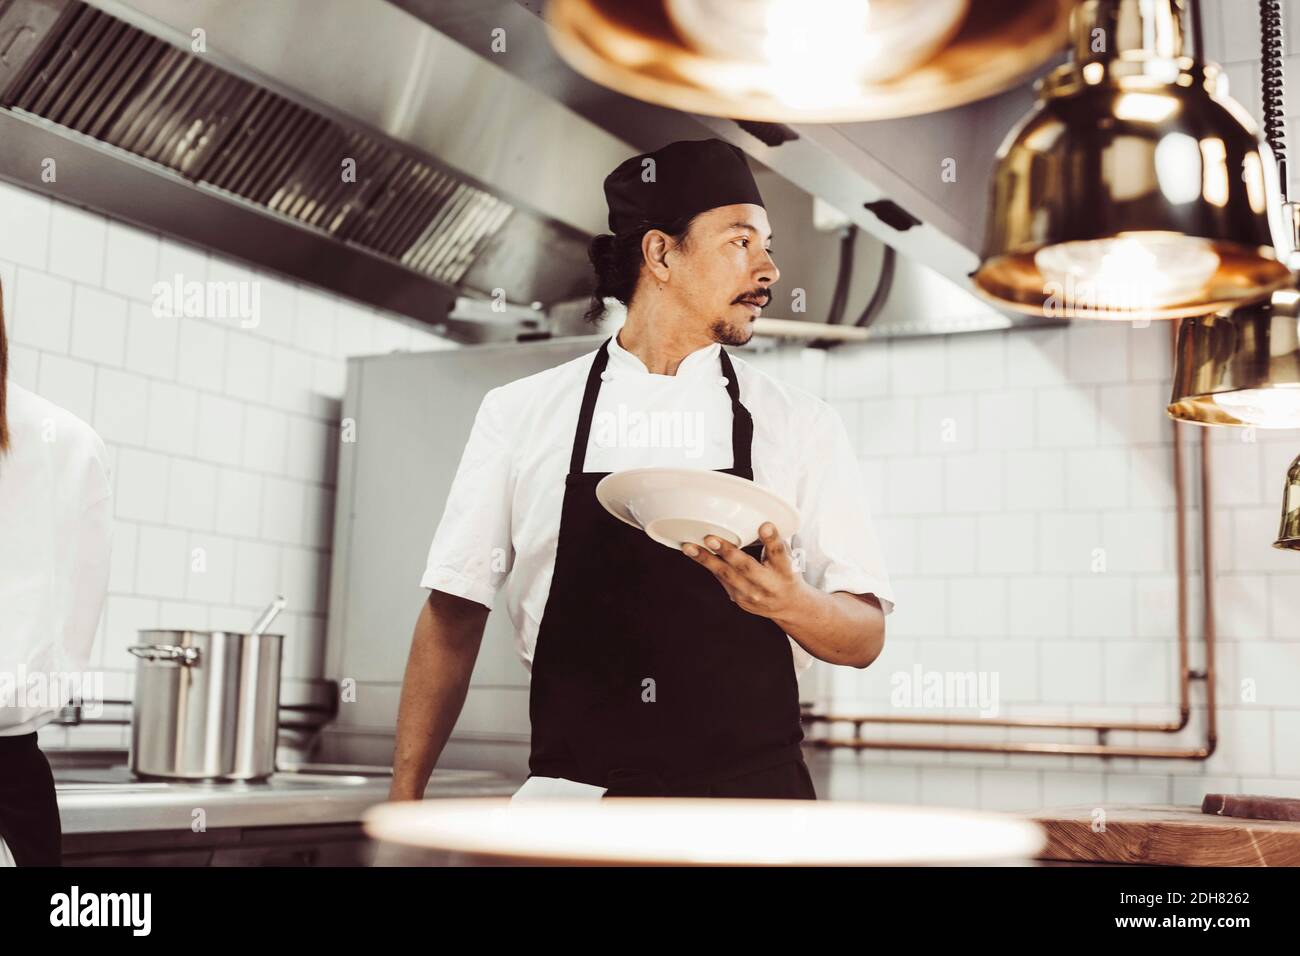 Male chef looking away while holding plate in commercial kitchen Stock Photo